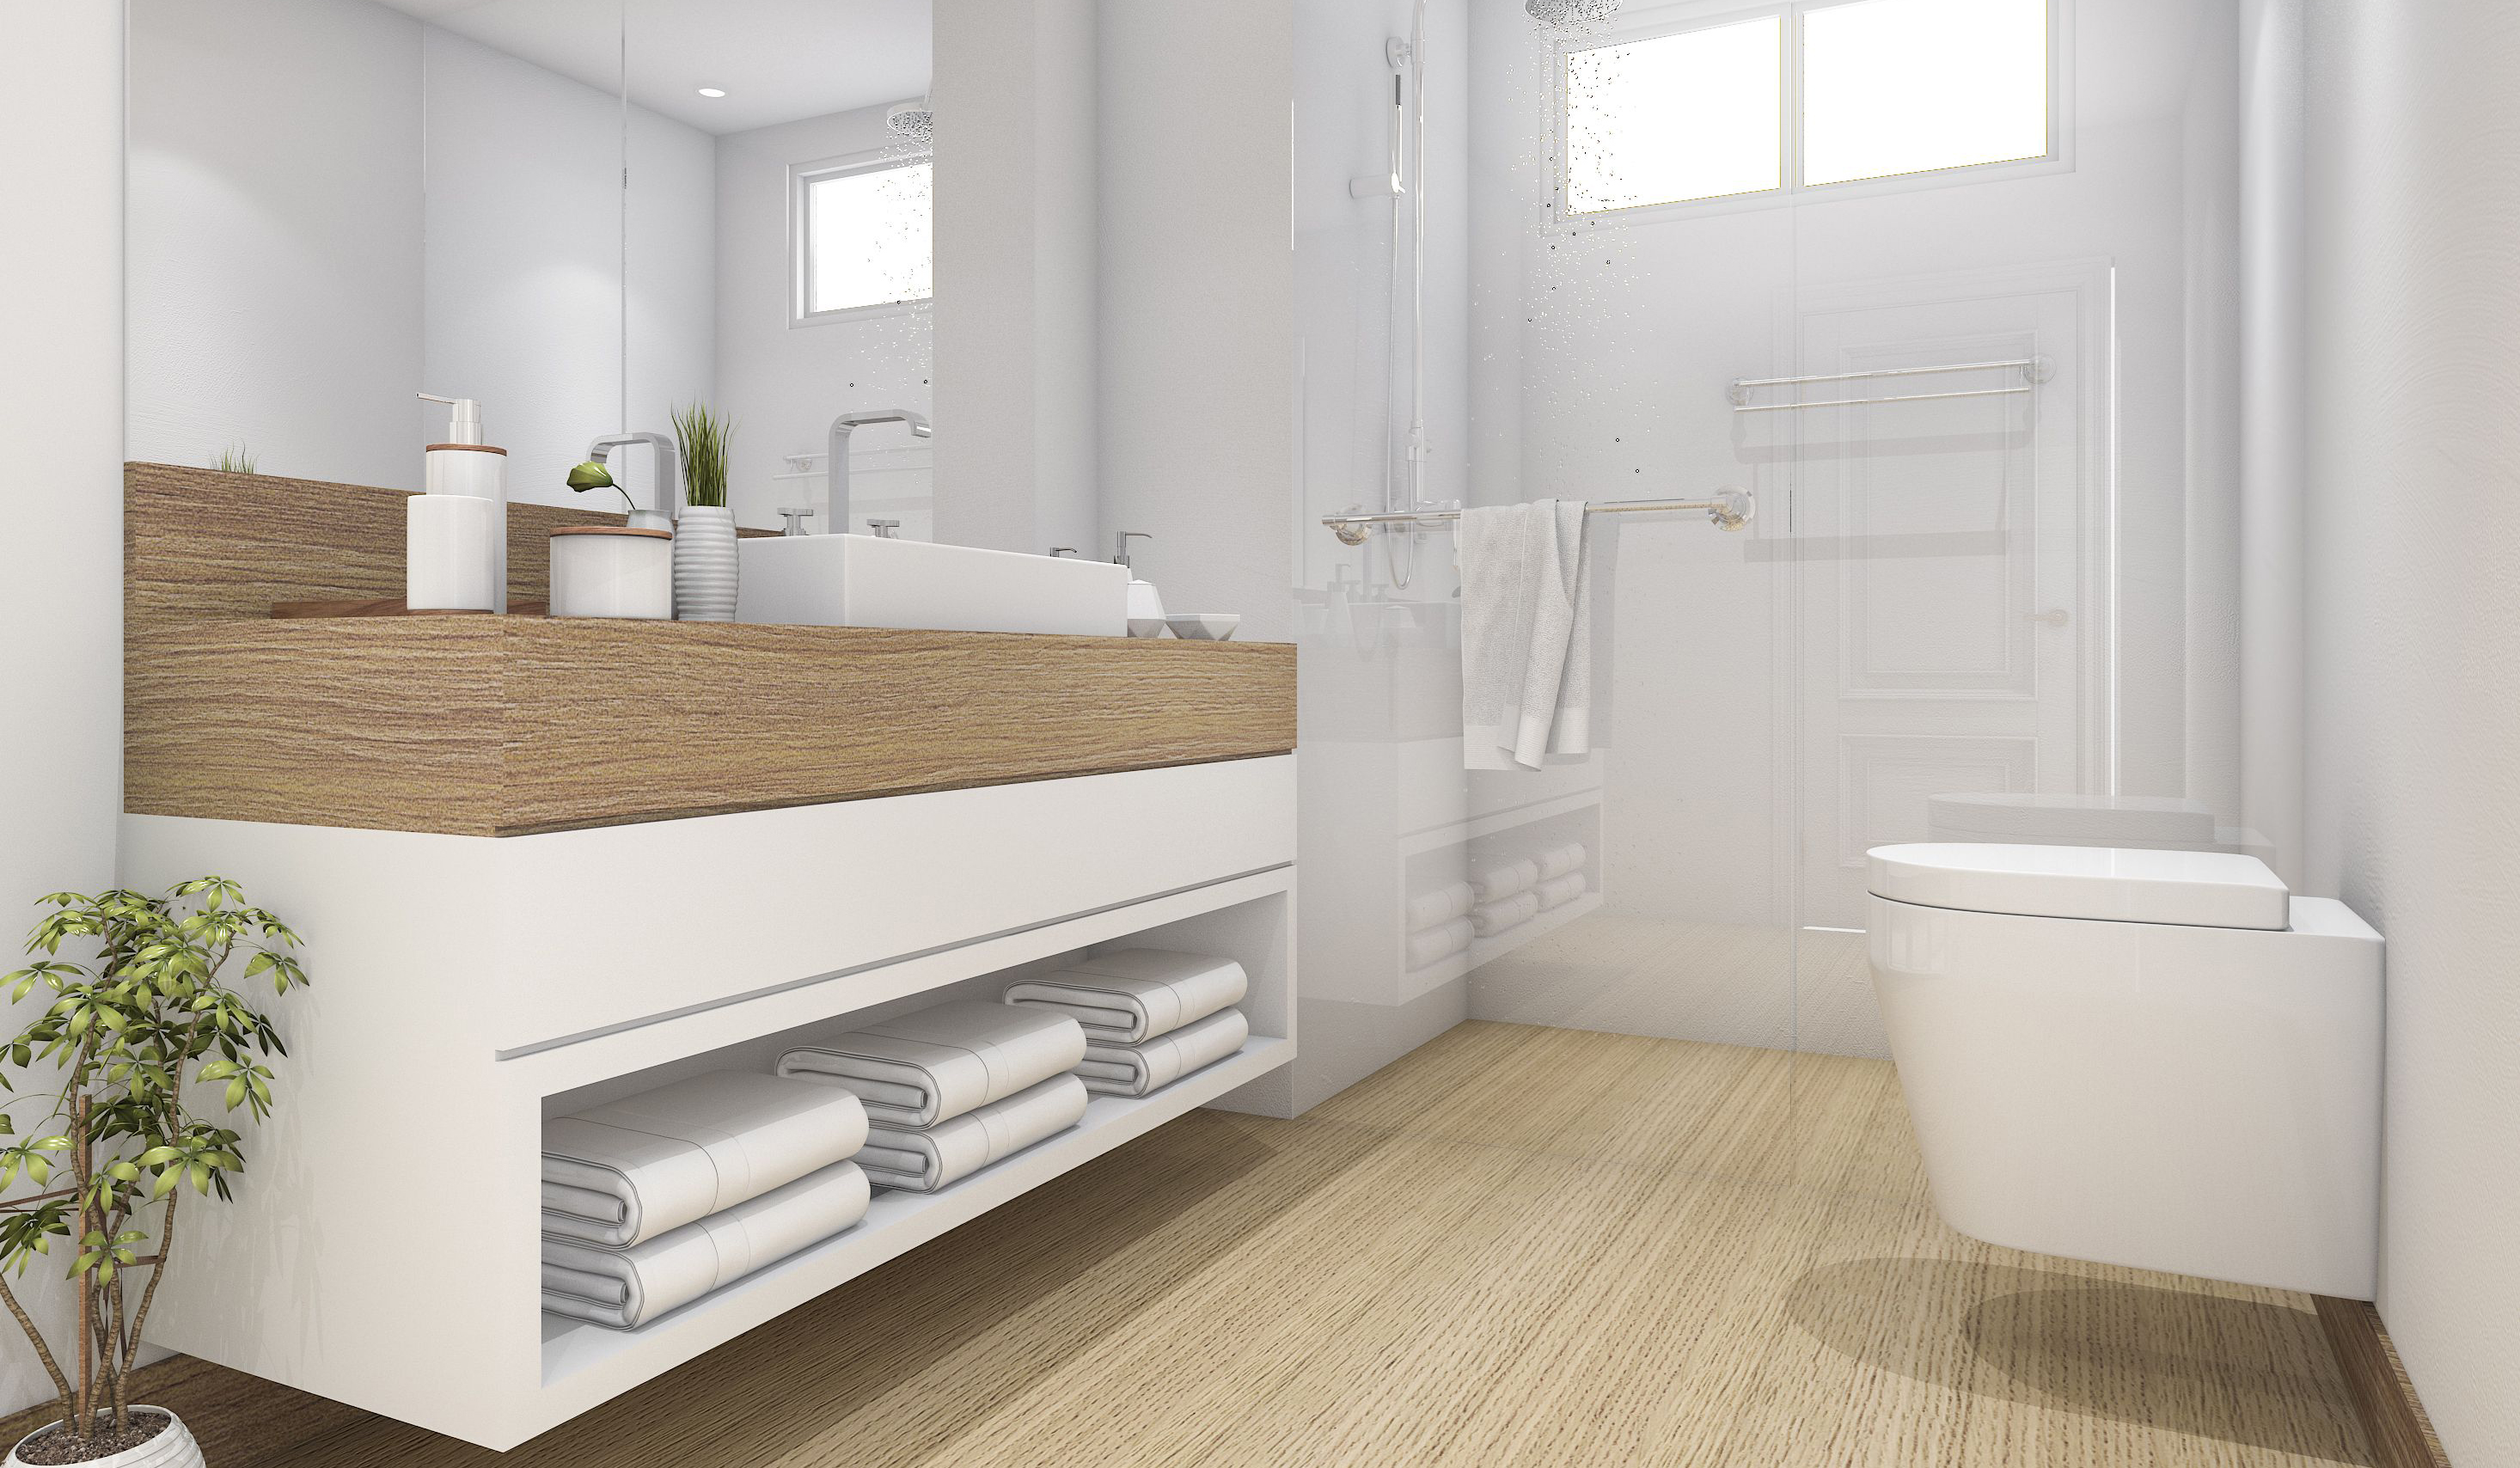 Precautions for the use and maintenance of bathroom cabinets